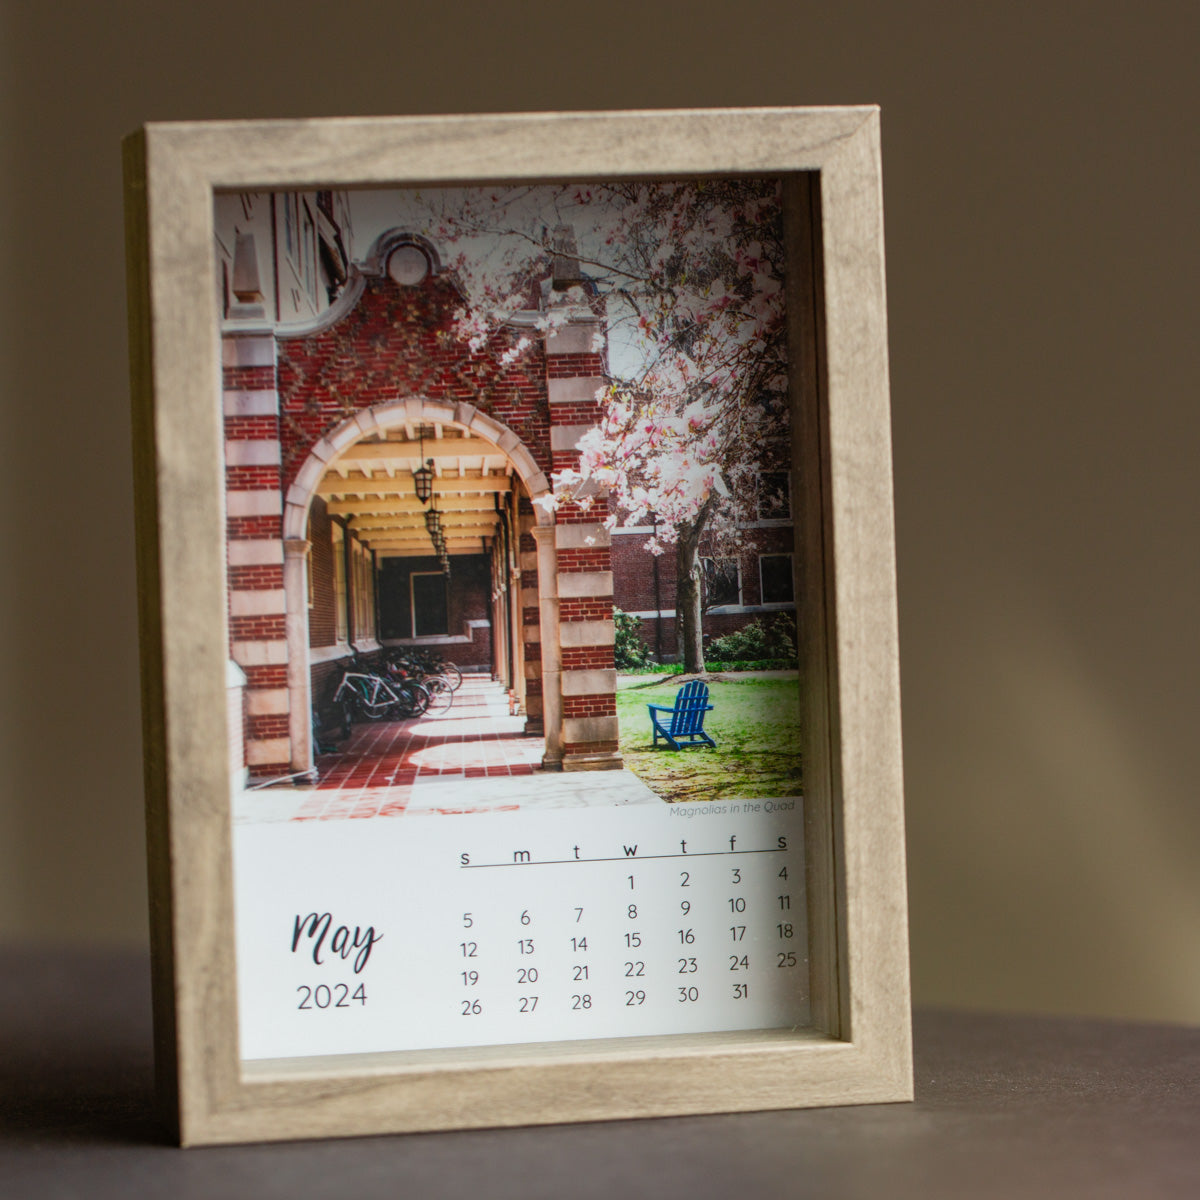 Wellesley College 2024 Photo Calendar framed example of the month of May